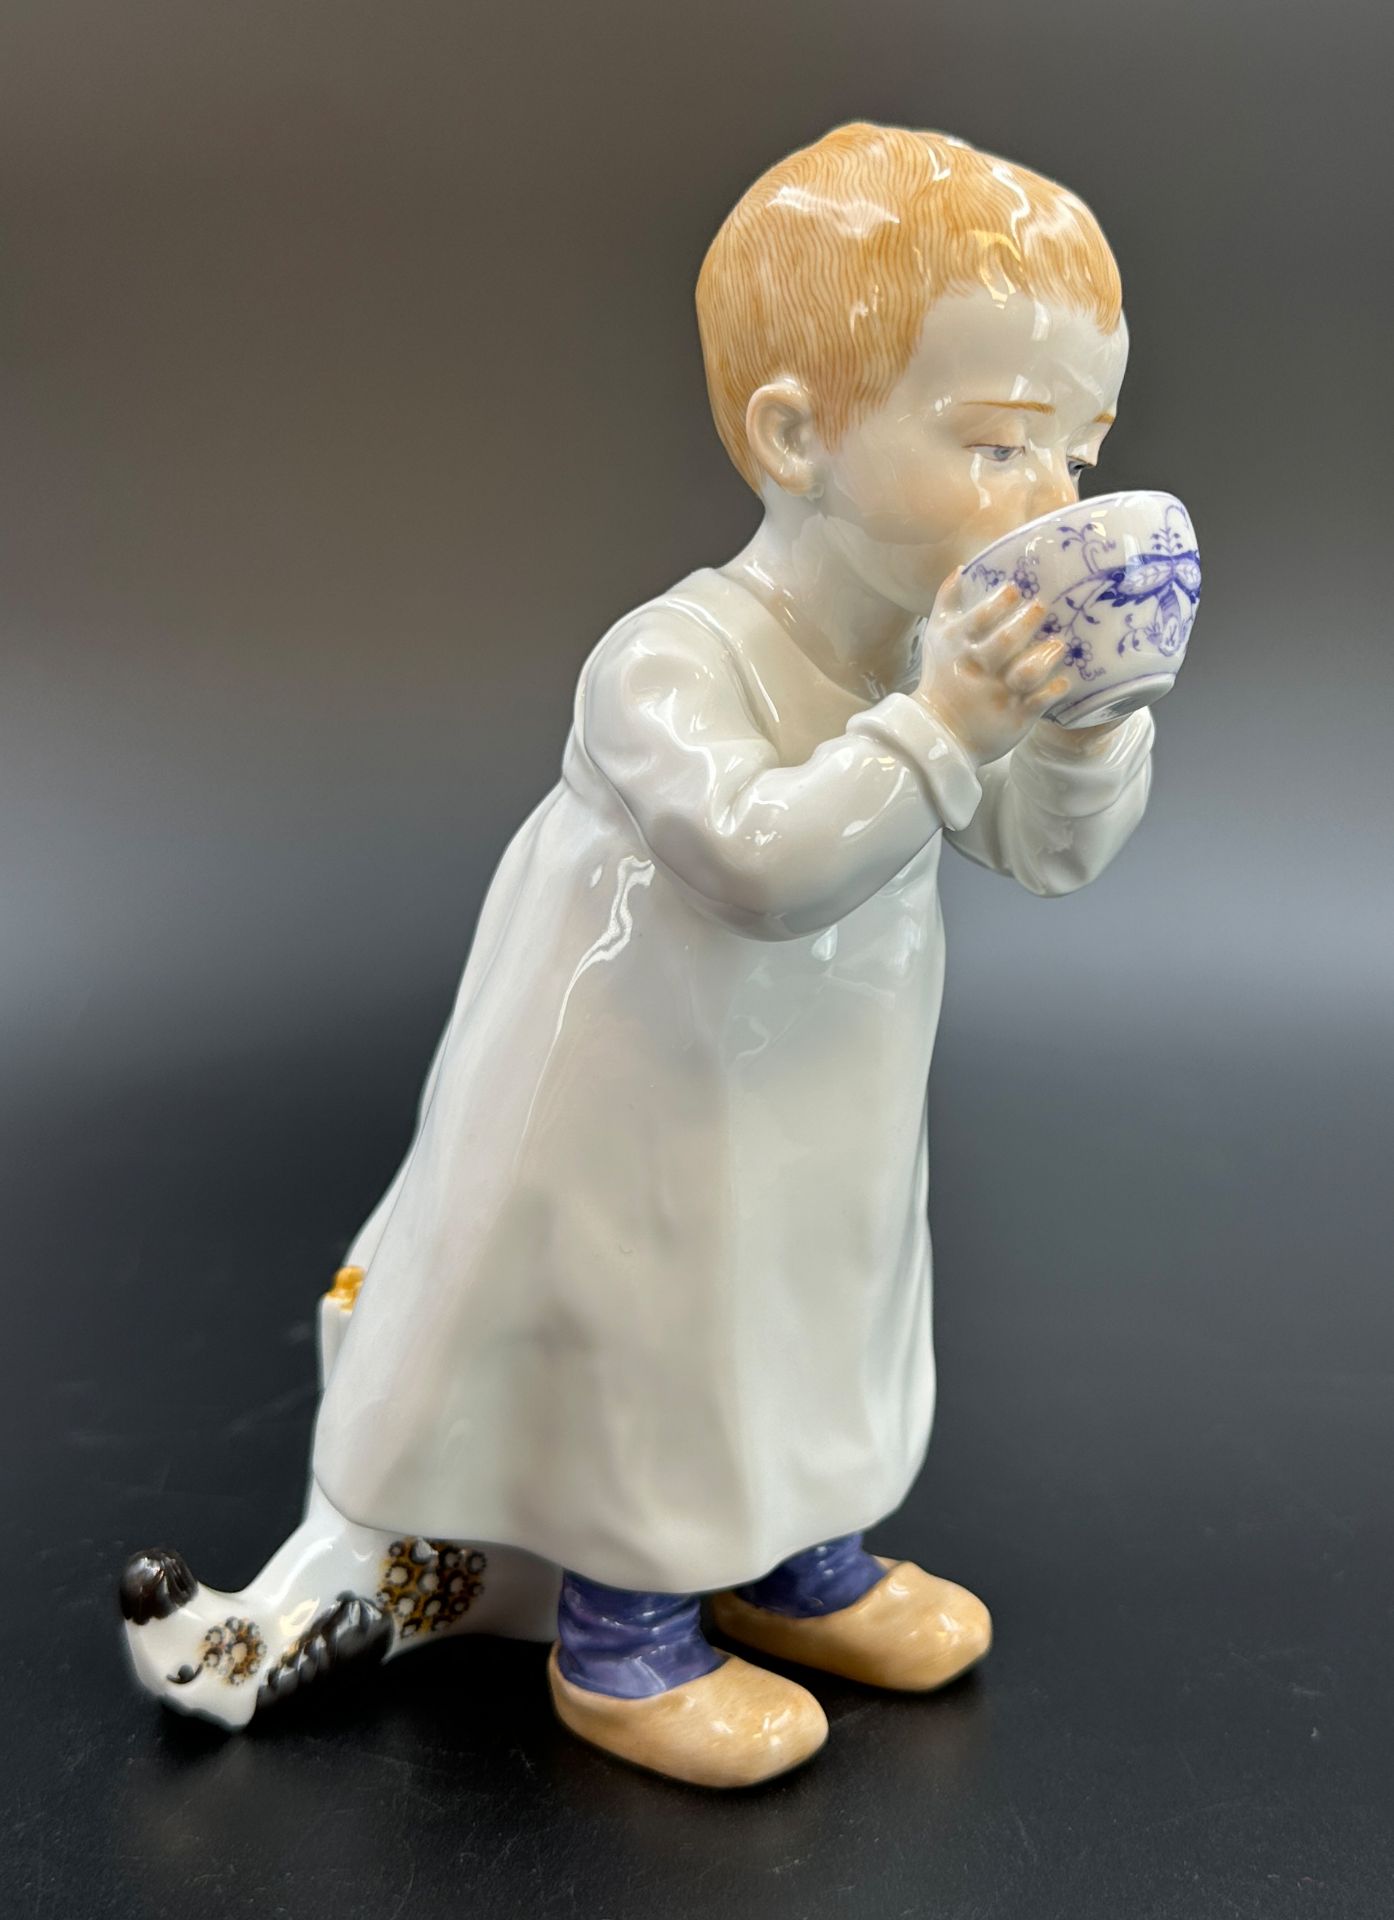 Hentschelkind. MEISSEN. "Child with cup". 1st choice. 1980s. - Image 8 of 11